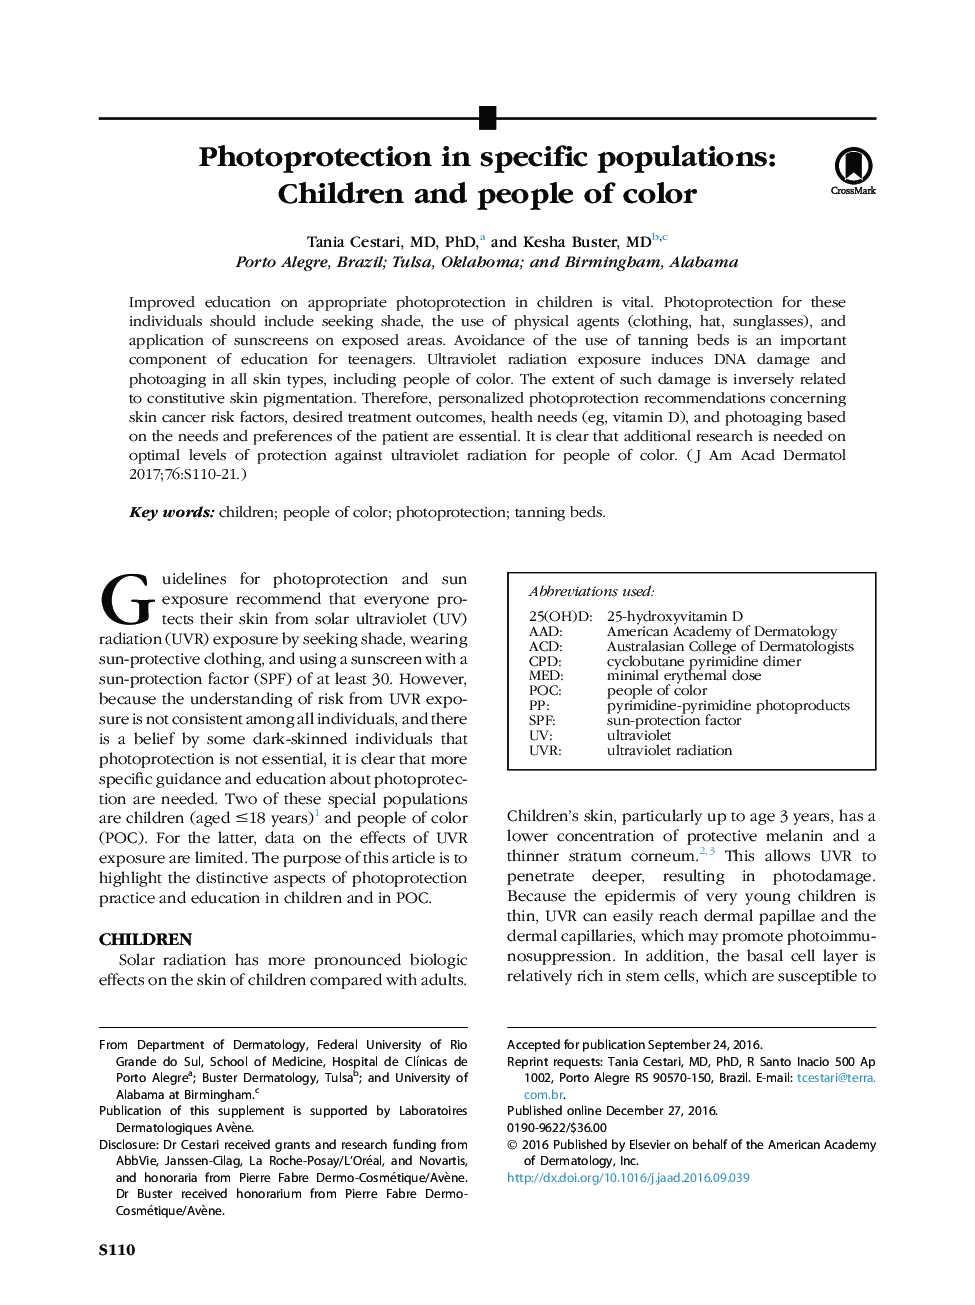 Photoprotection in specific populations: Children and people of color